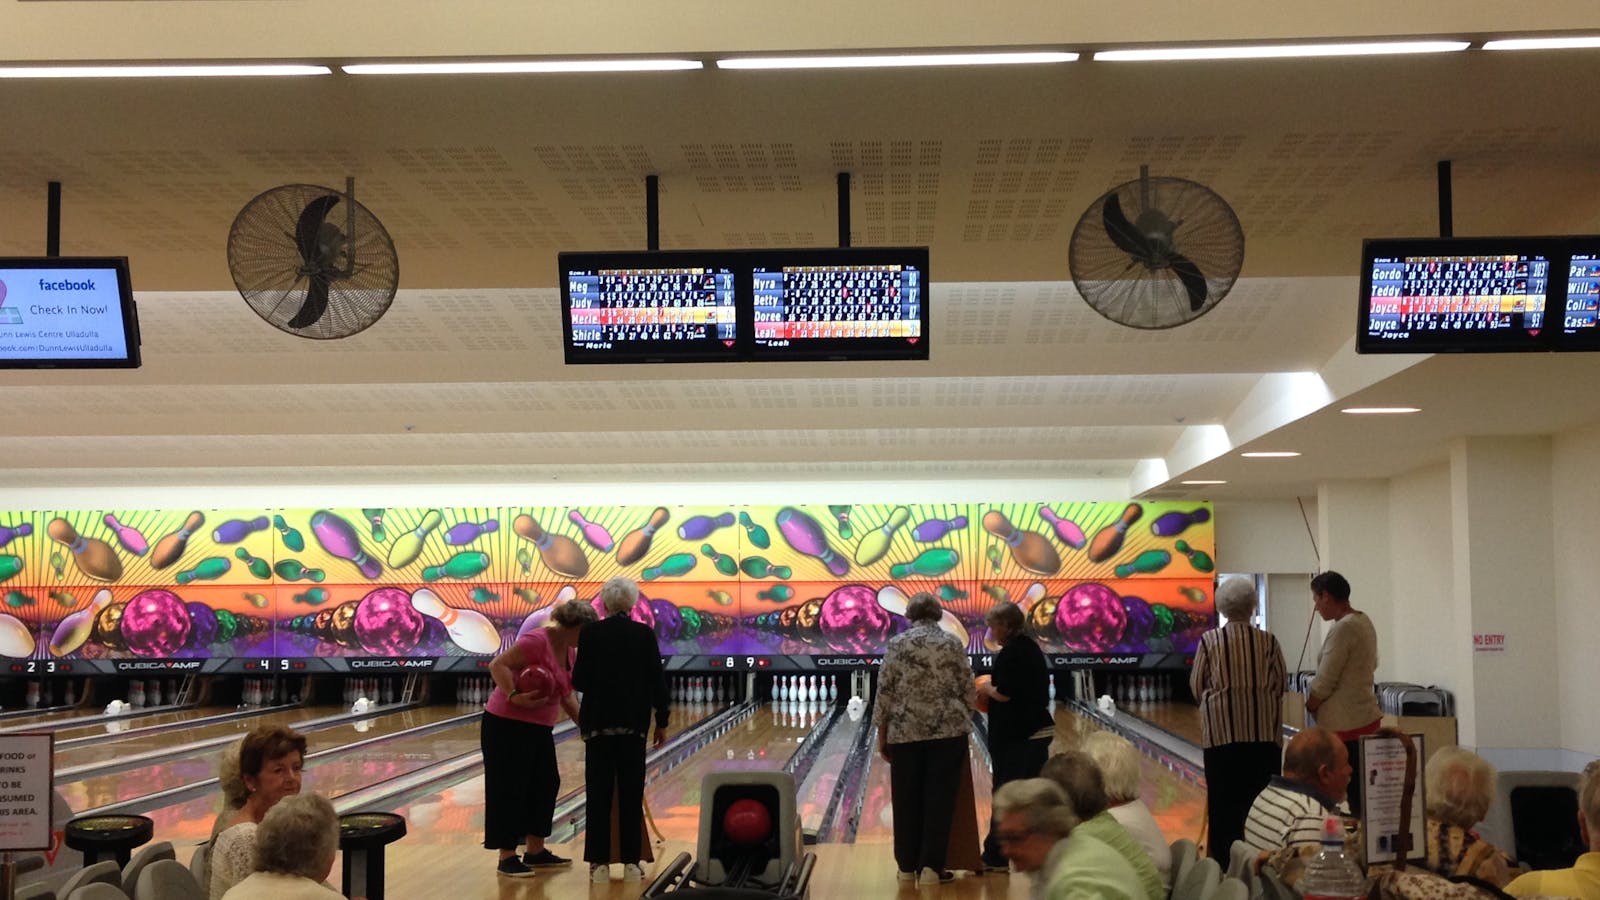 Tenpin bowling fun for all ages